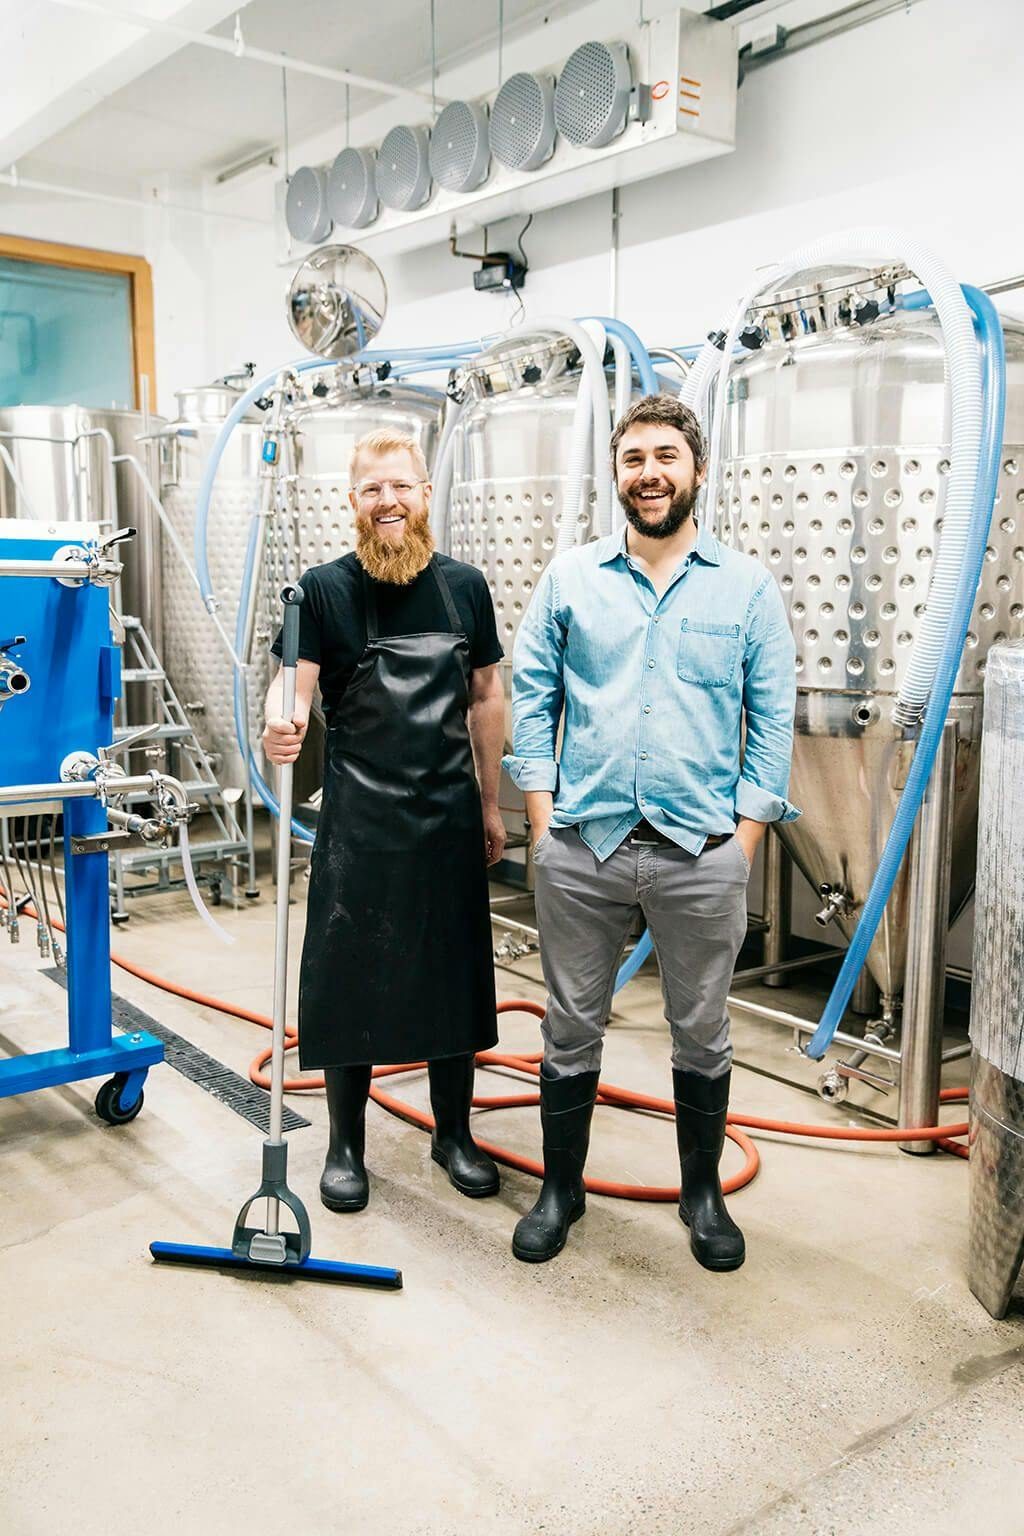 Co-founders Brandon Doughan and Brian Polen in the Brooklyn Kura brewing facility.